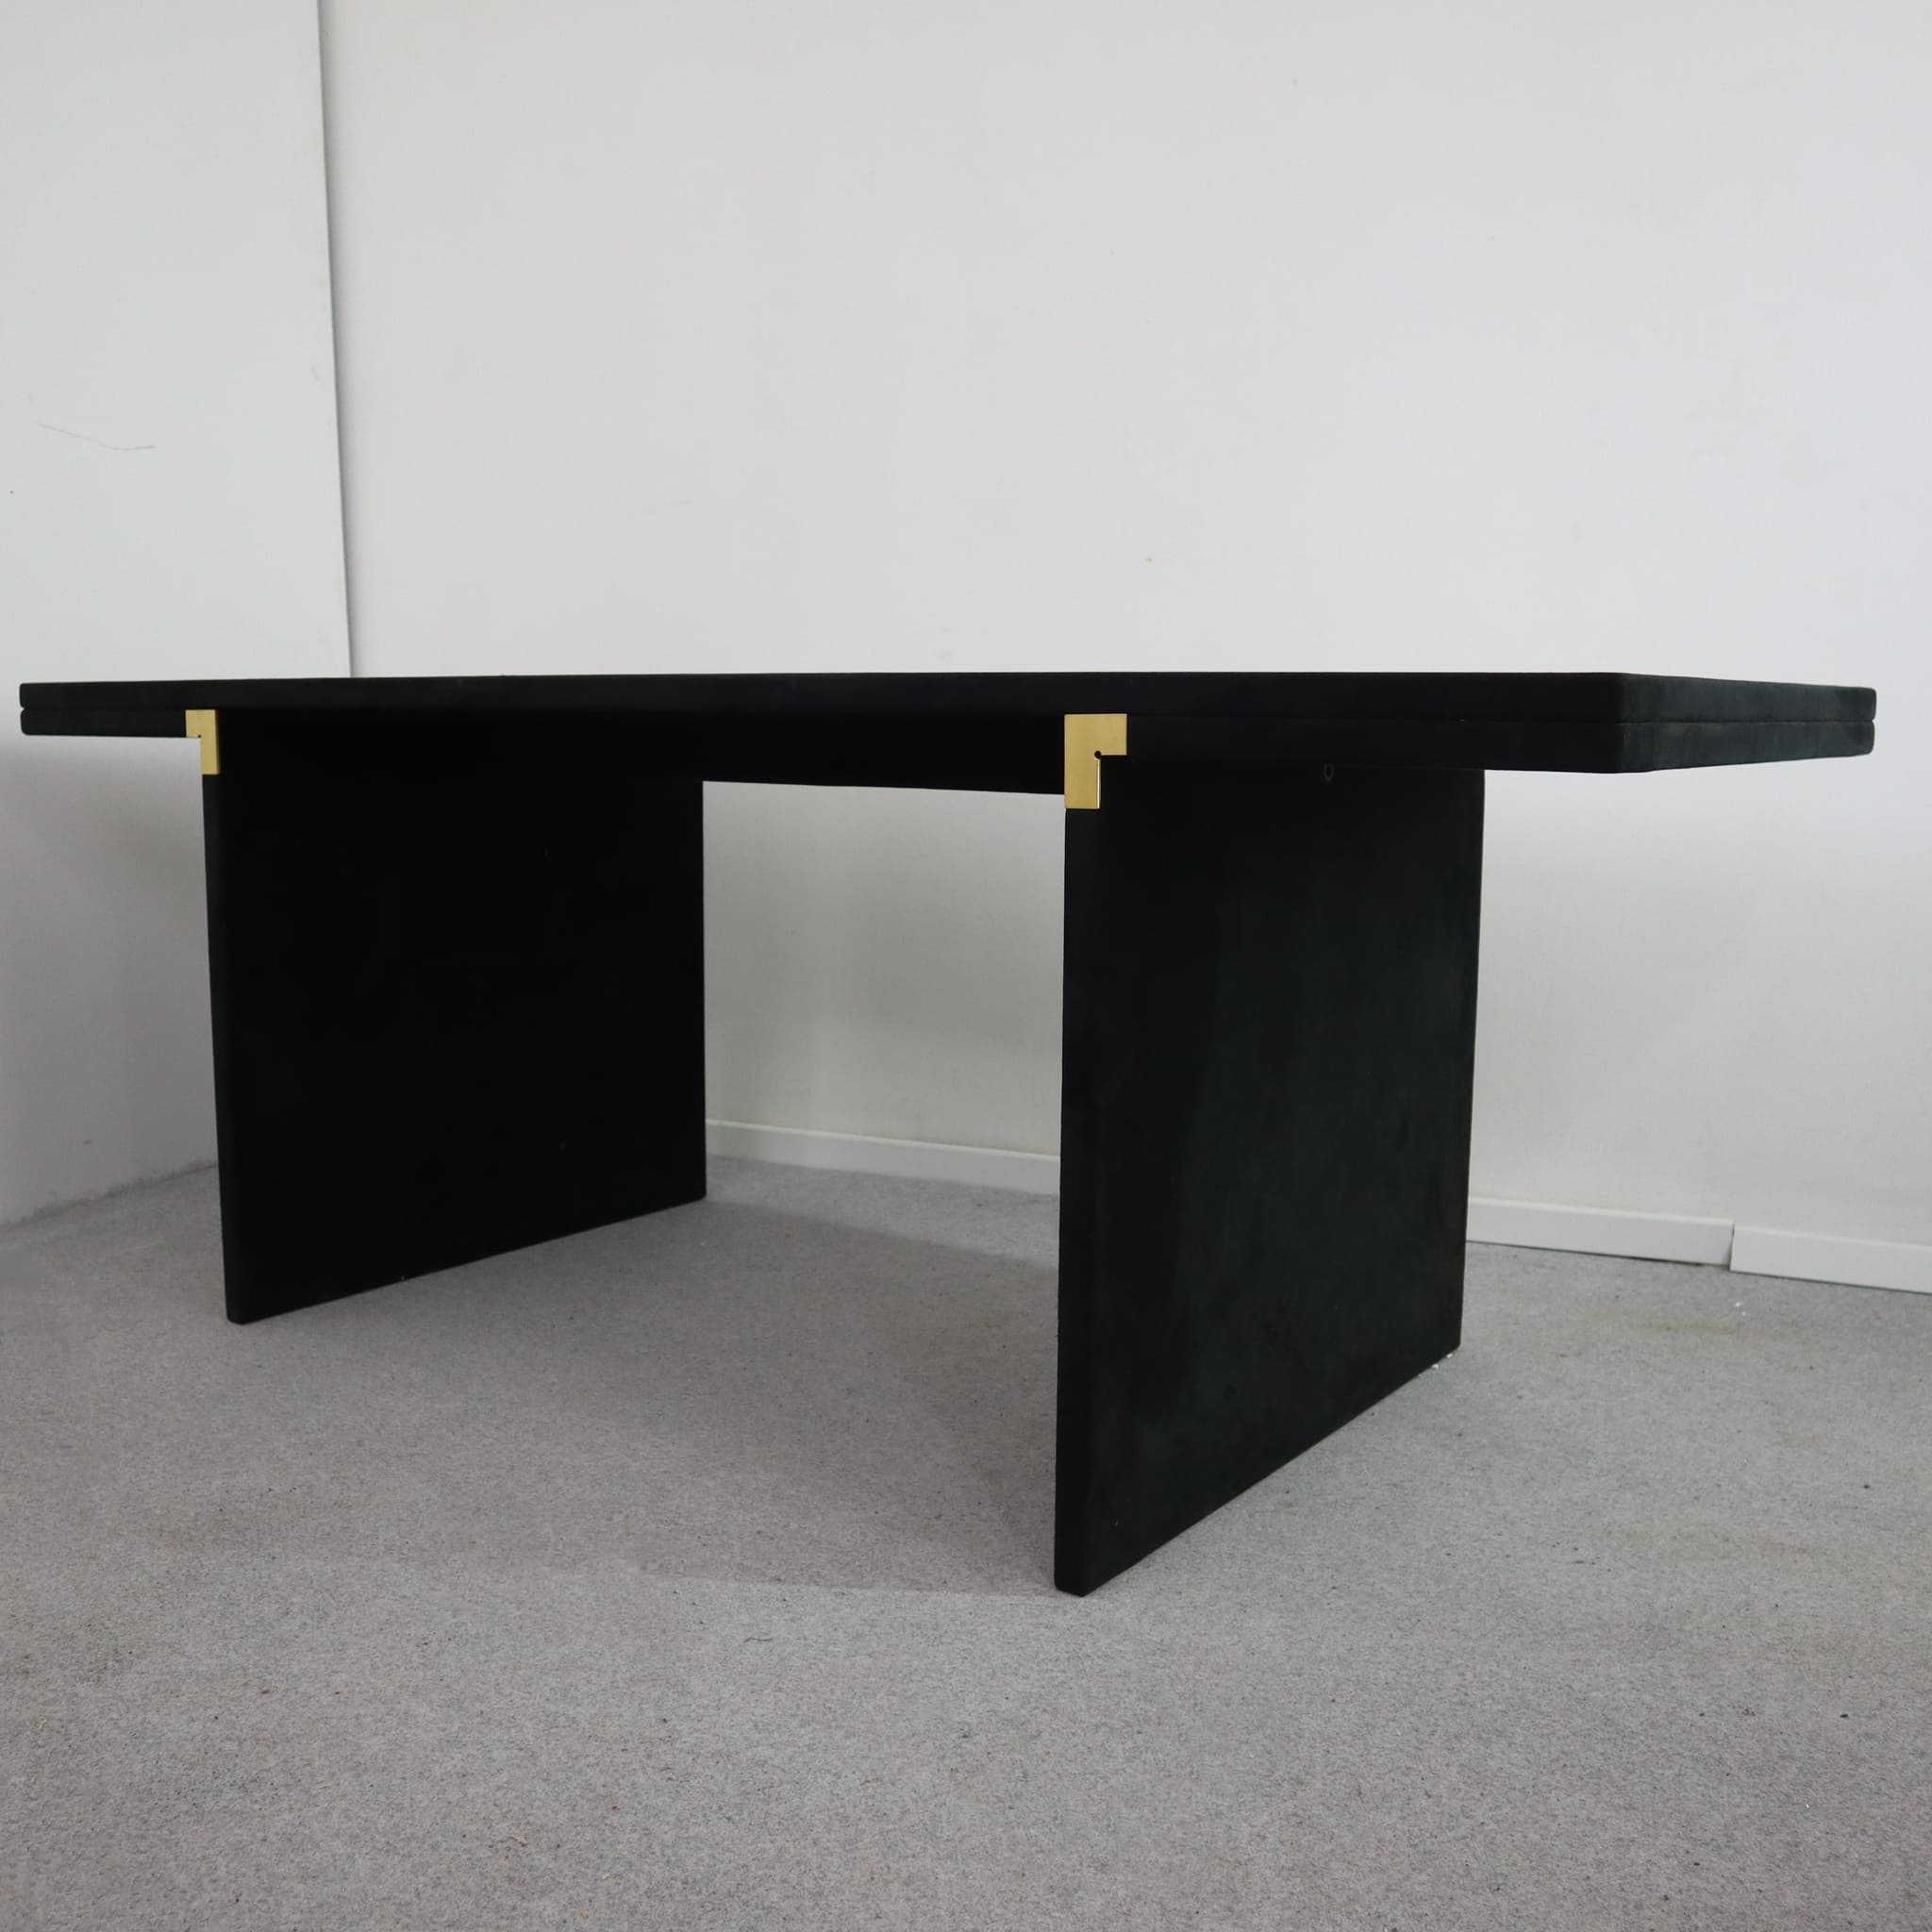 visionidepoca-modern-design-table-orseolo-by-carlo-scarpa-for-simon-gavina-all-in-velvet-70s-side-view